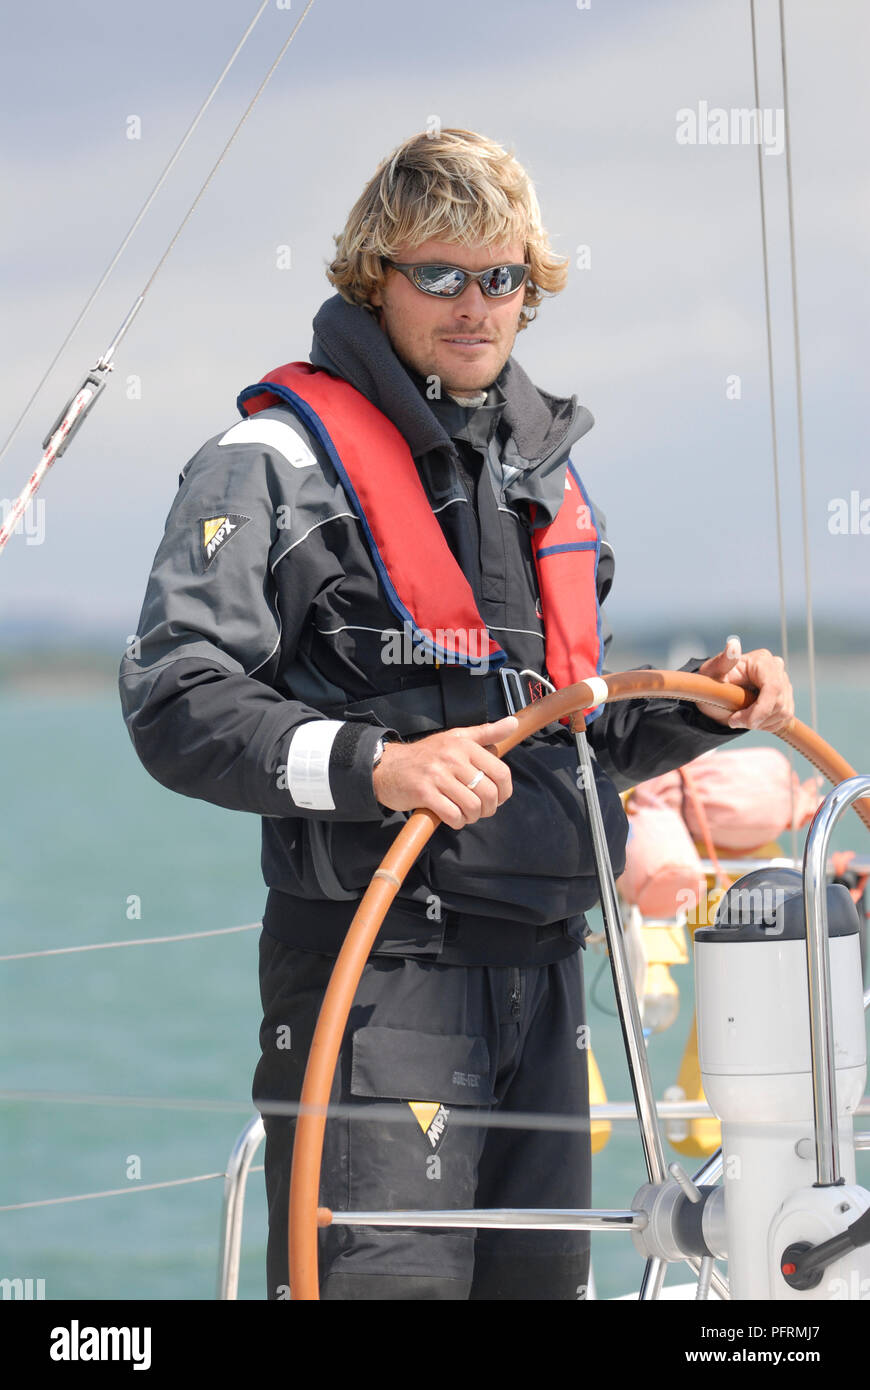 Man with sunglasses on standing at helm of a sailing boat Stock Photo